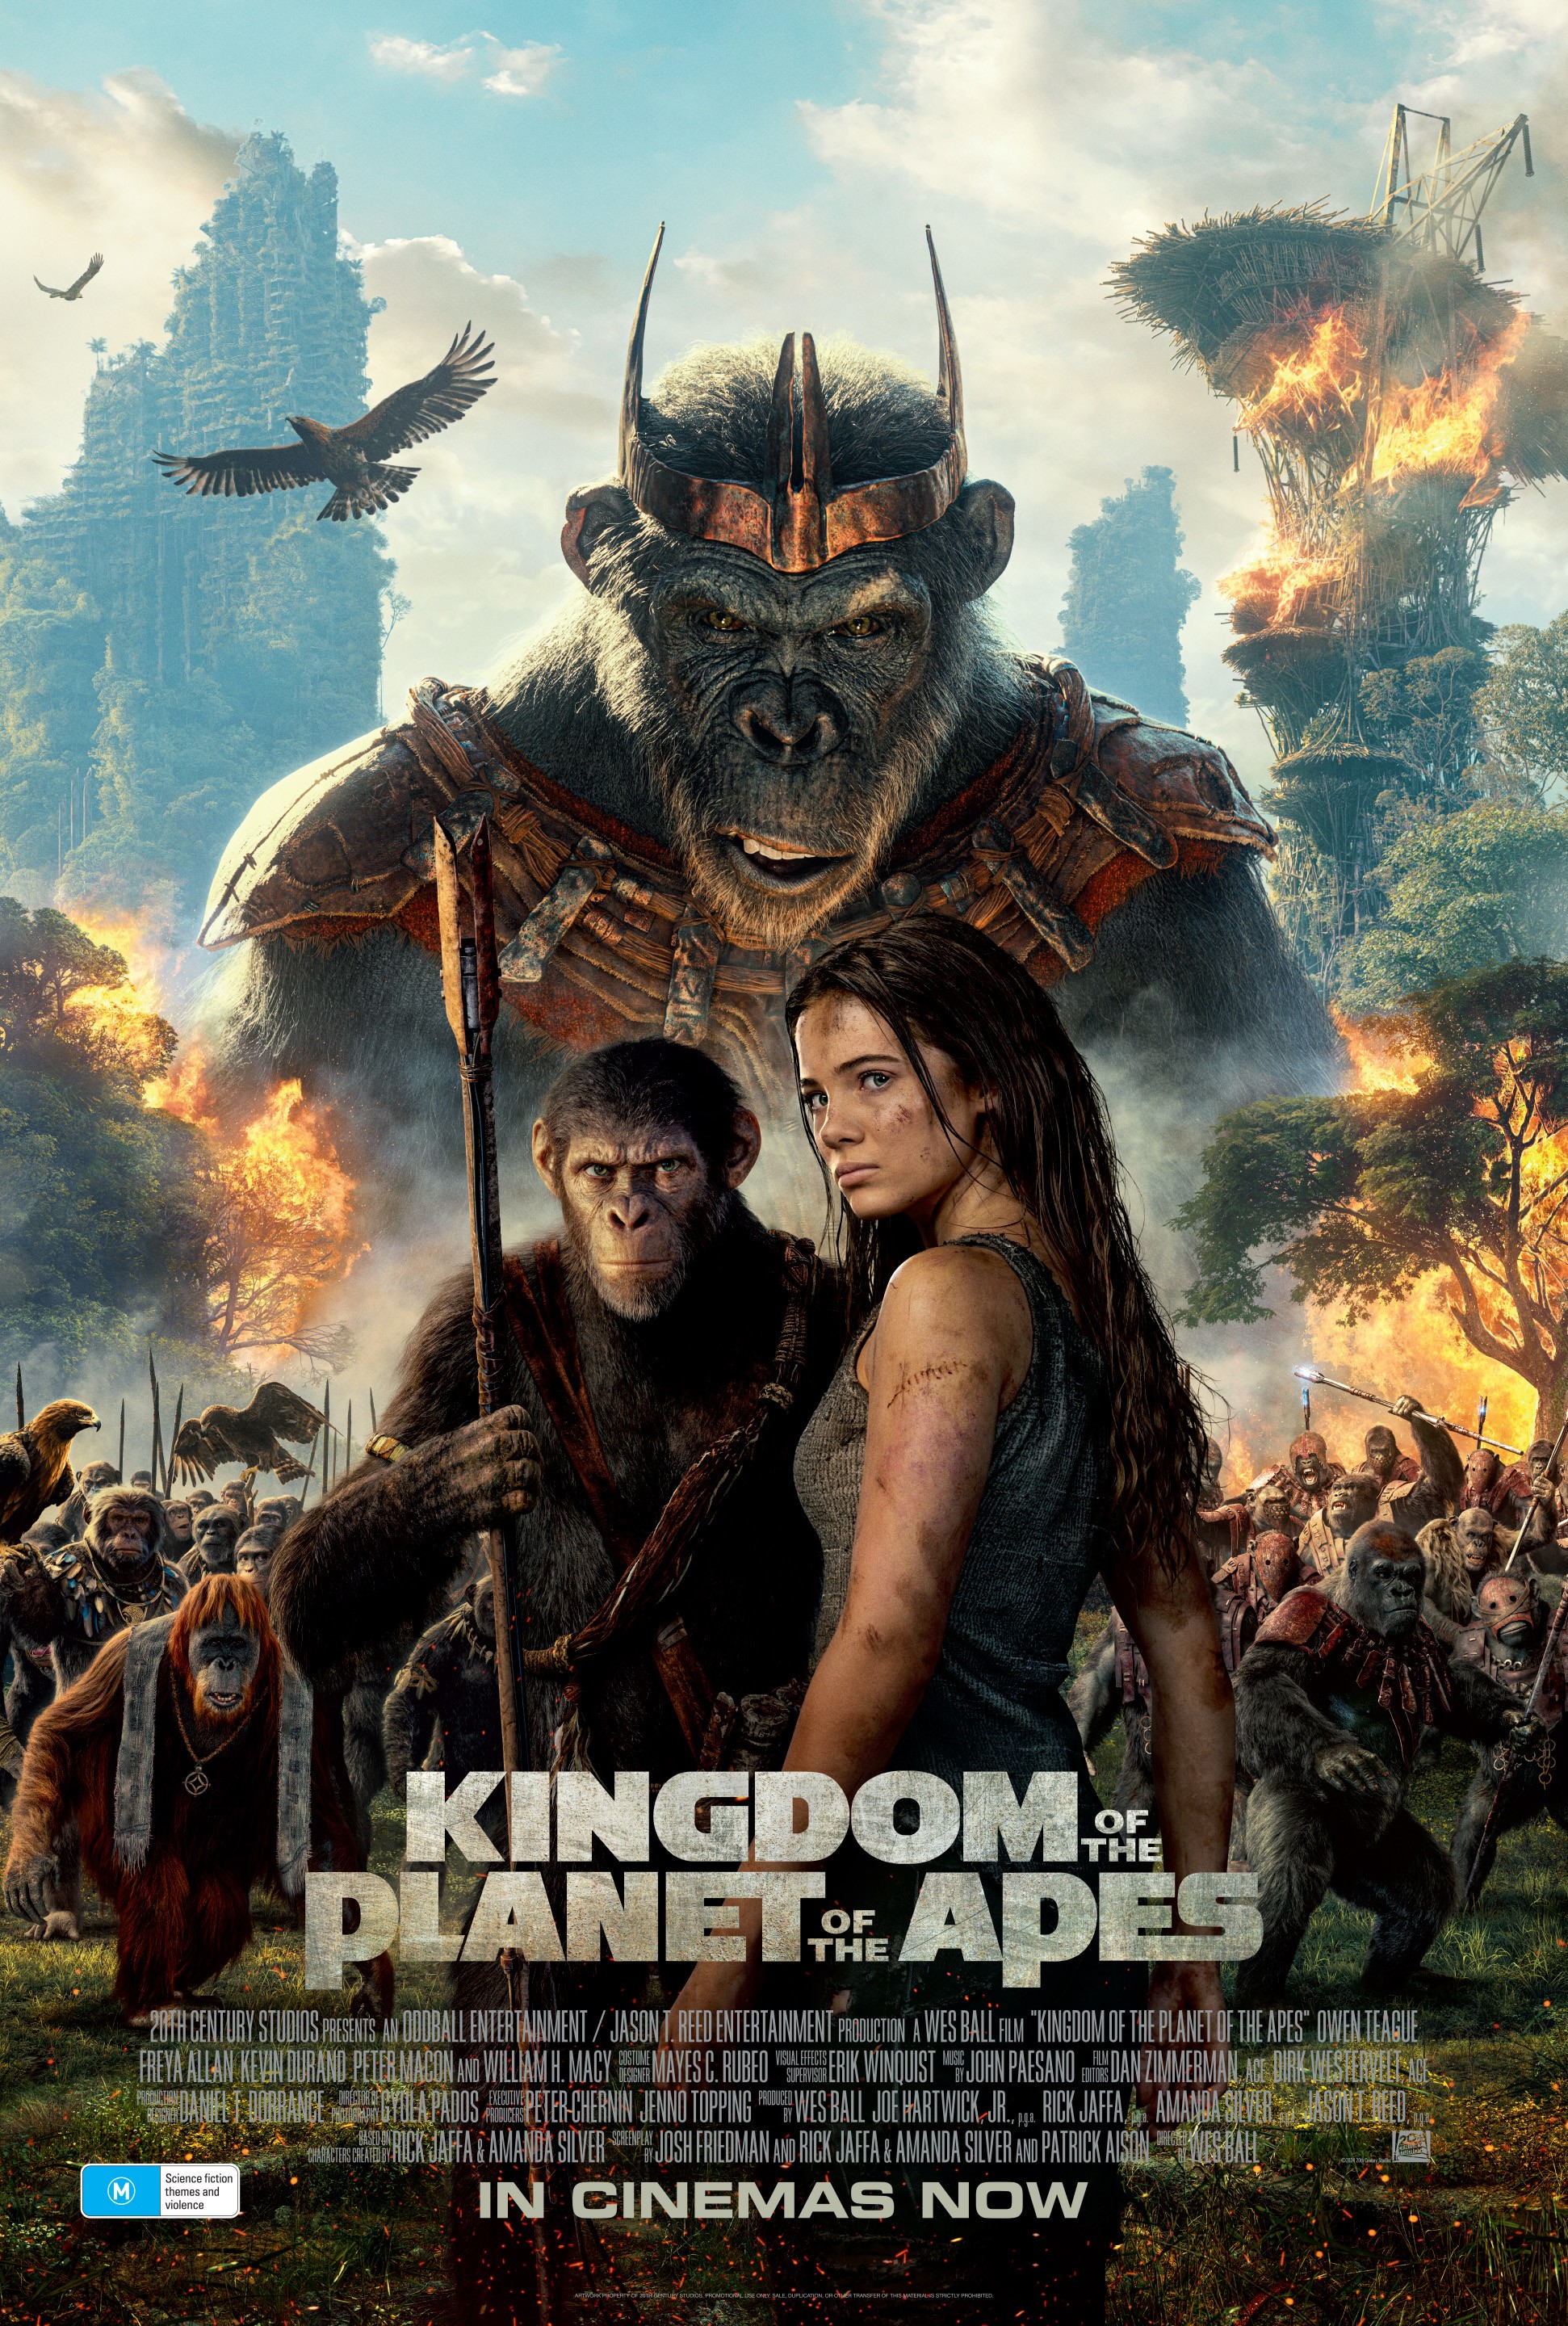 https://shotcan.com/images/2024/05/15/kingdom-of-the-planet-of-the-apes-4994836aa4865c13cfc6392d.jpg